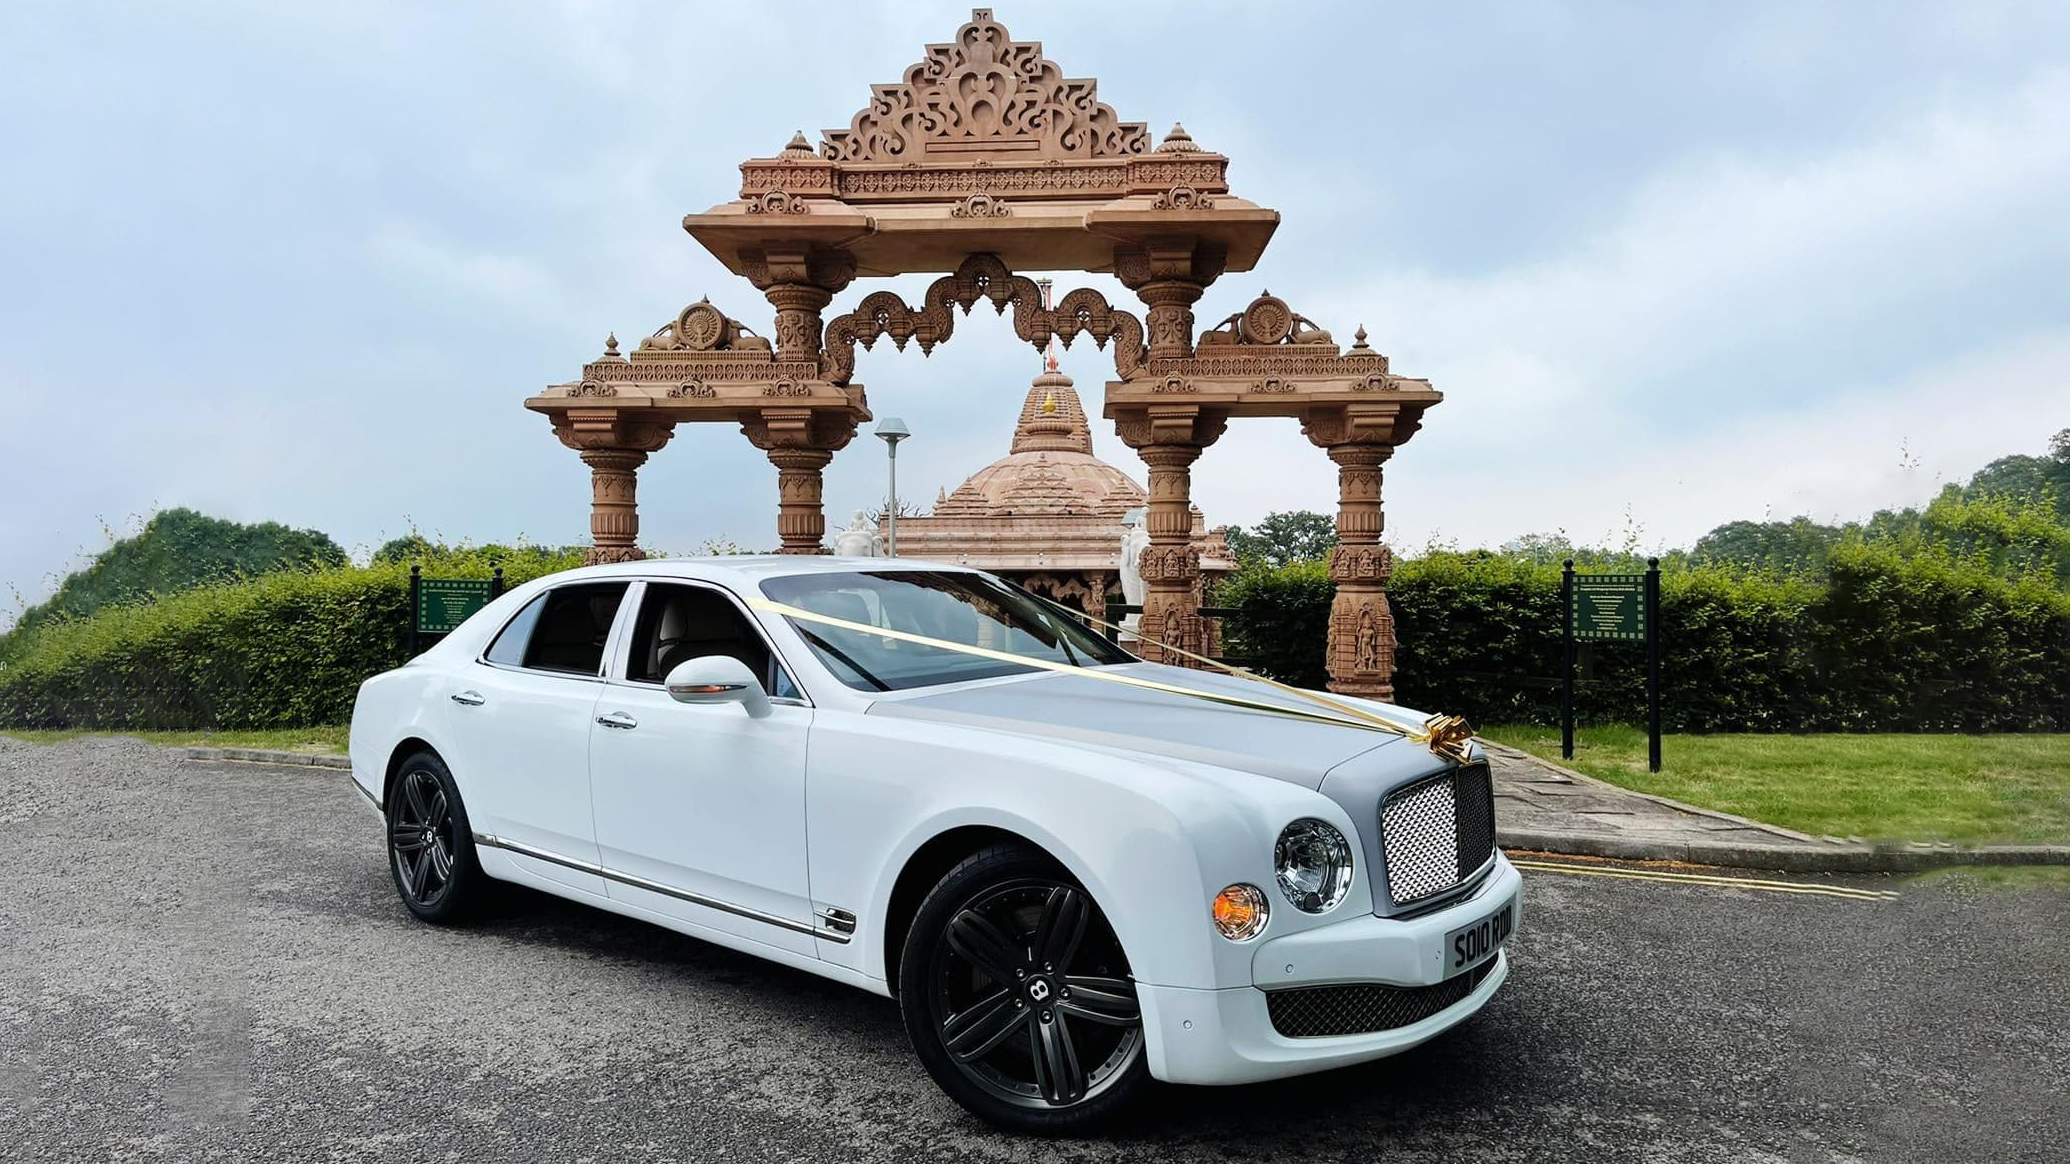 Modern Bentley Mulsanne with Black alloy wheels and Gold ribbons park in front of an Asian Temple in Shefford.